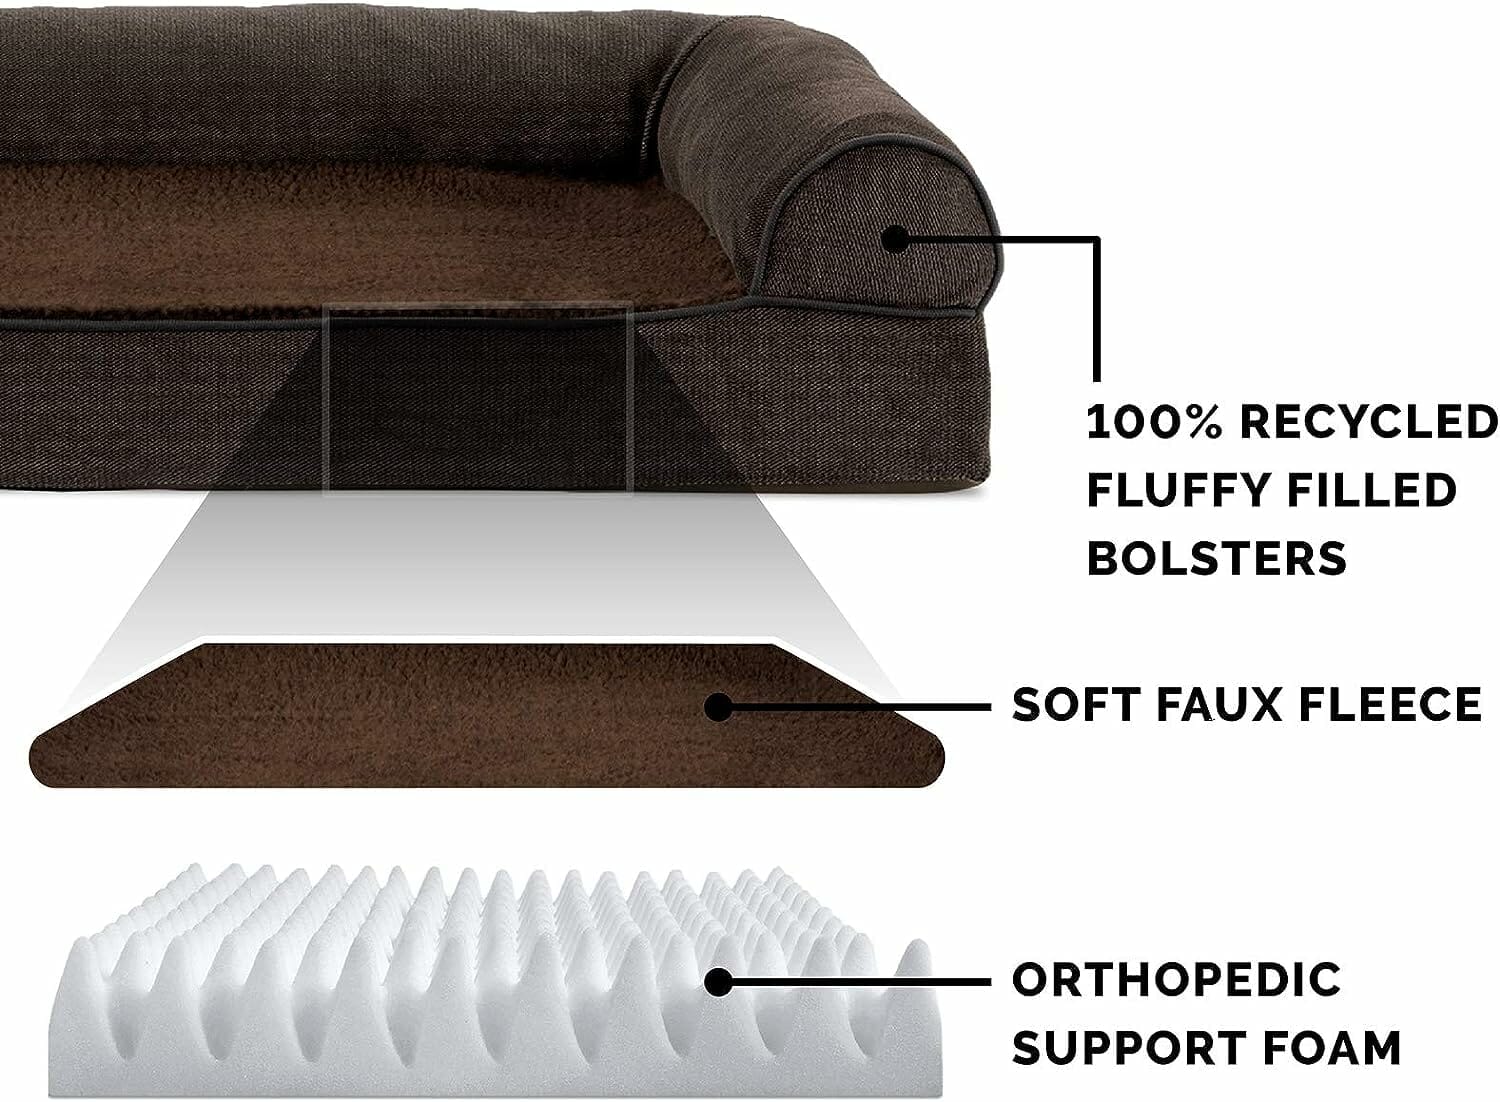 Sherpa & Chenille Sofa Bed Review – The Ultimate Comfort for Your Pup?